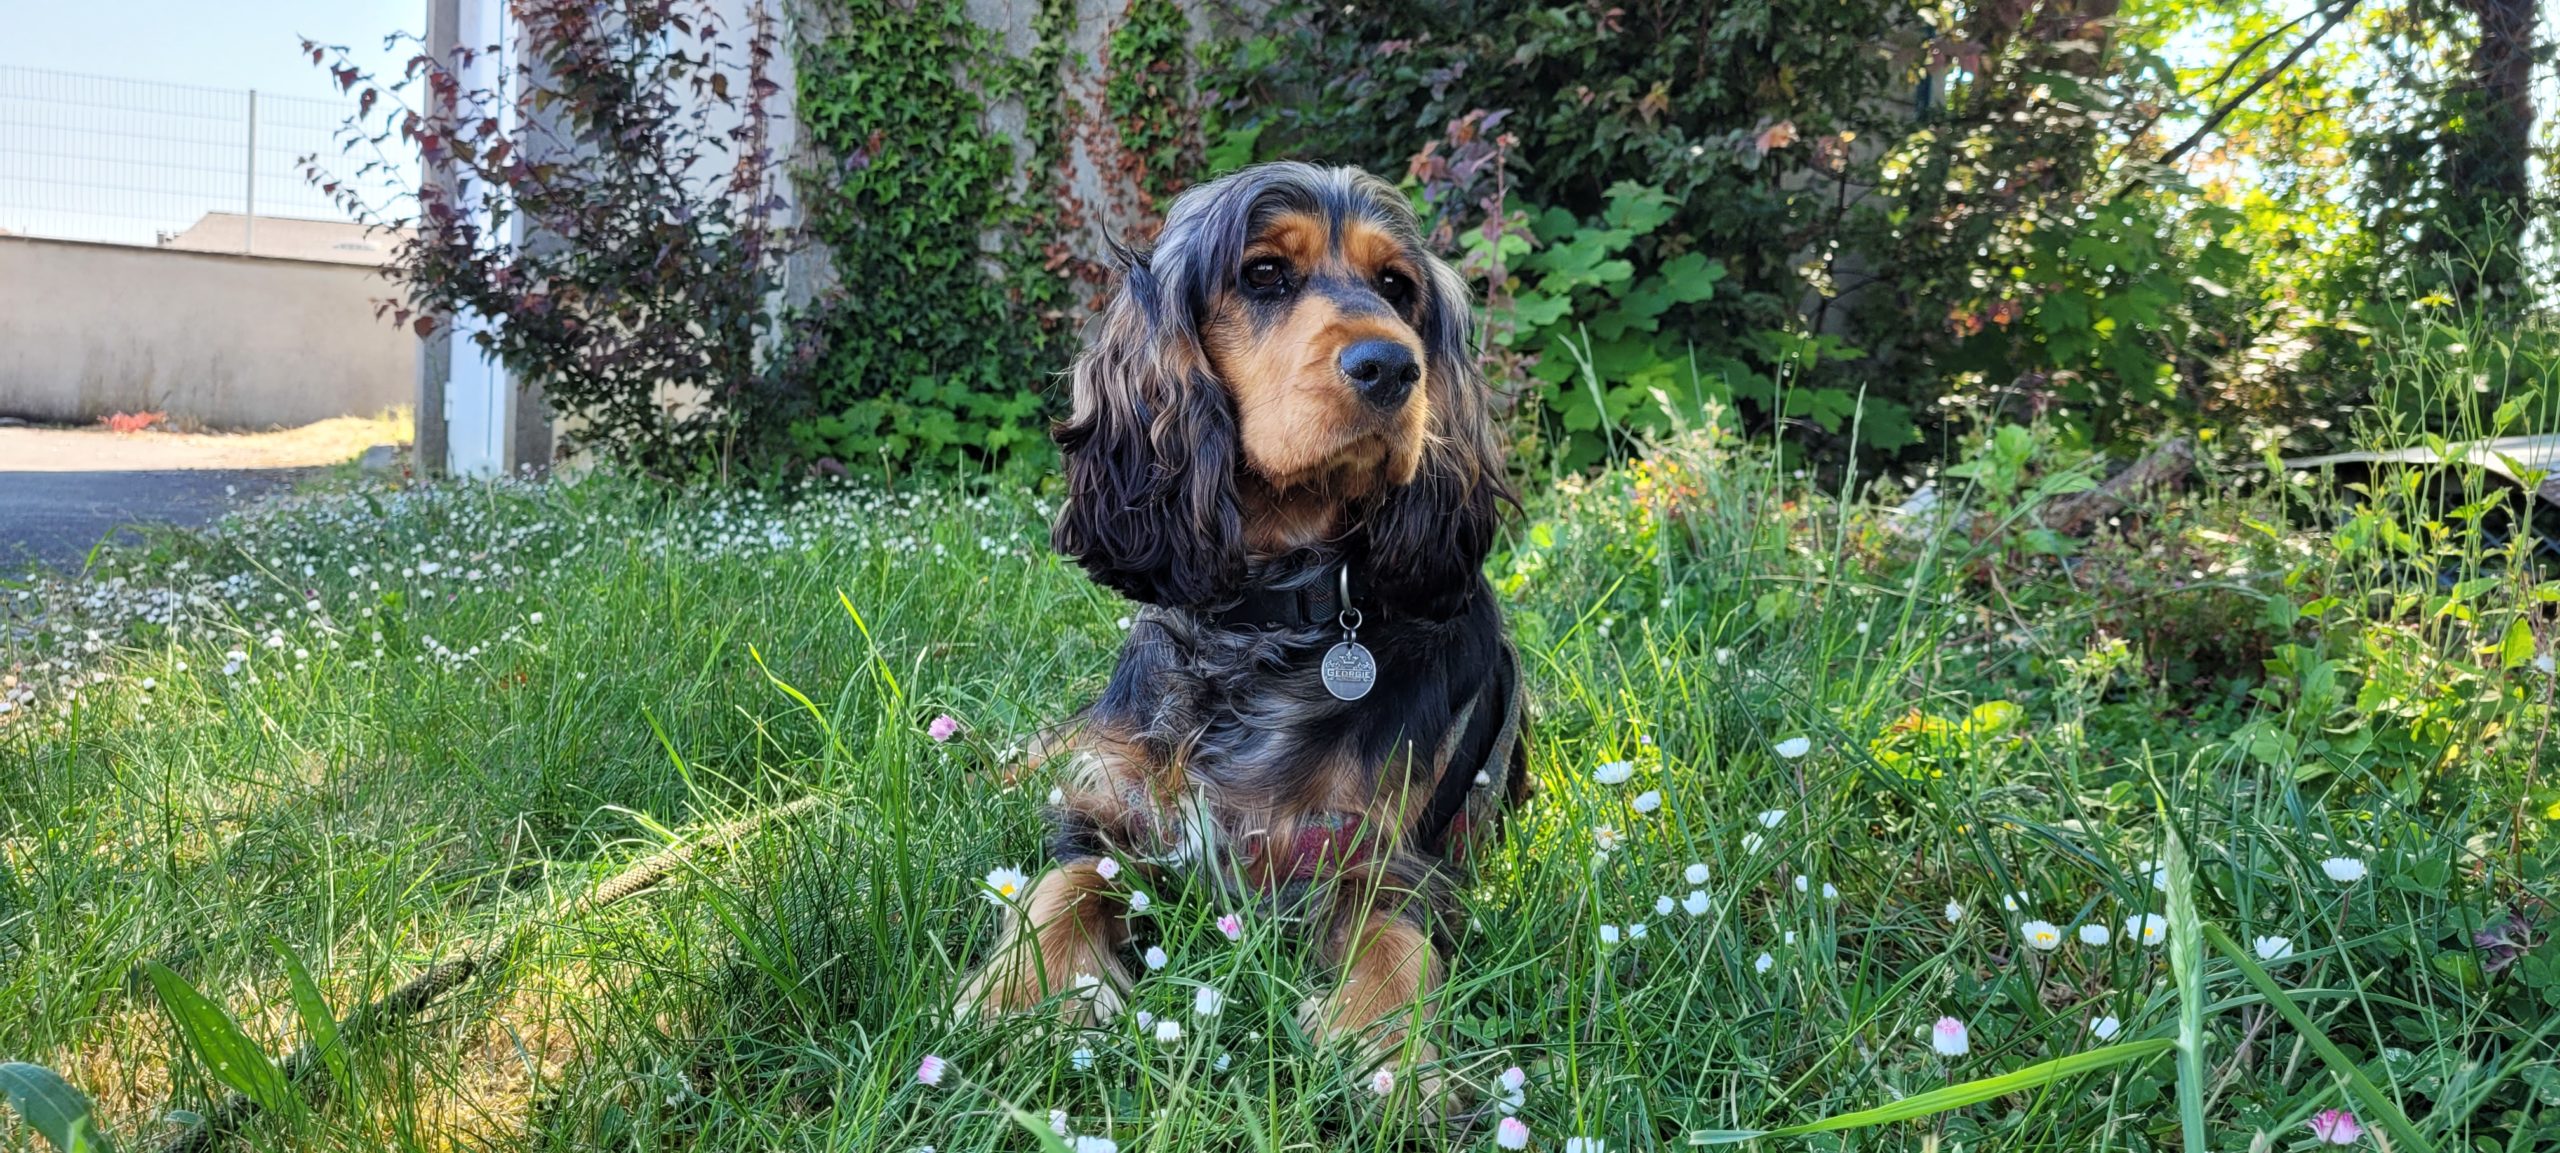 a cocker spaniel in grass and flowers